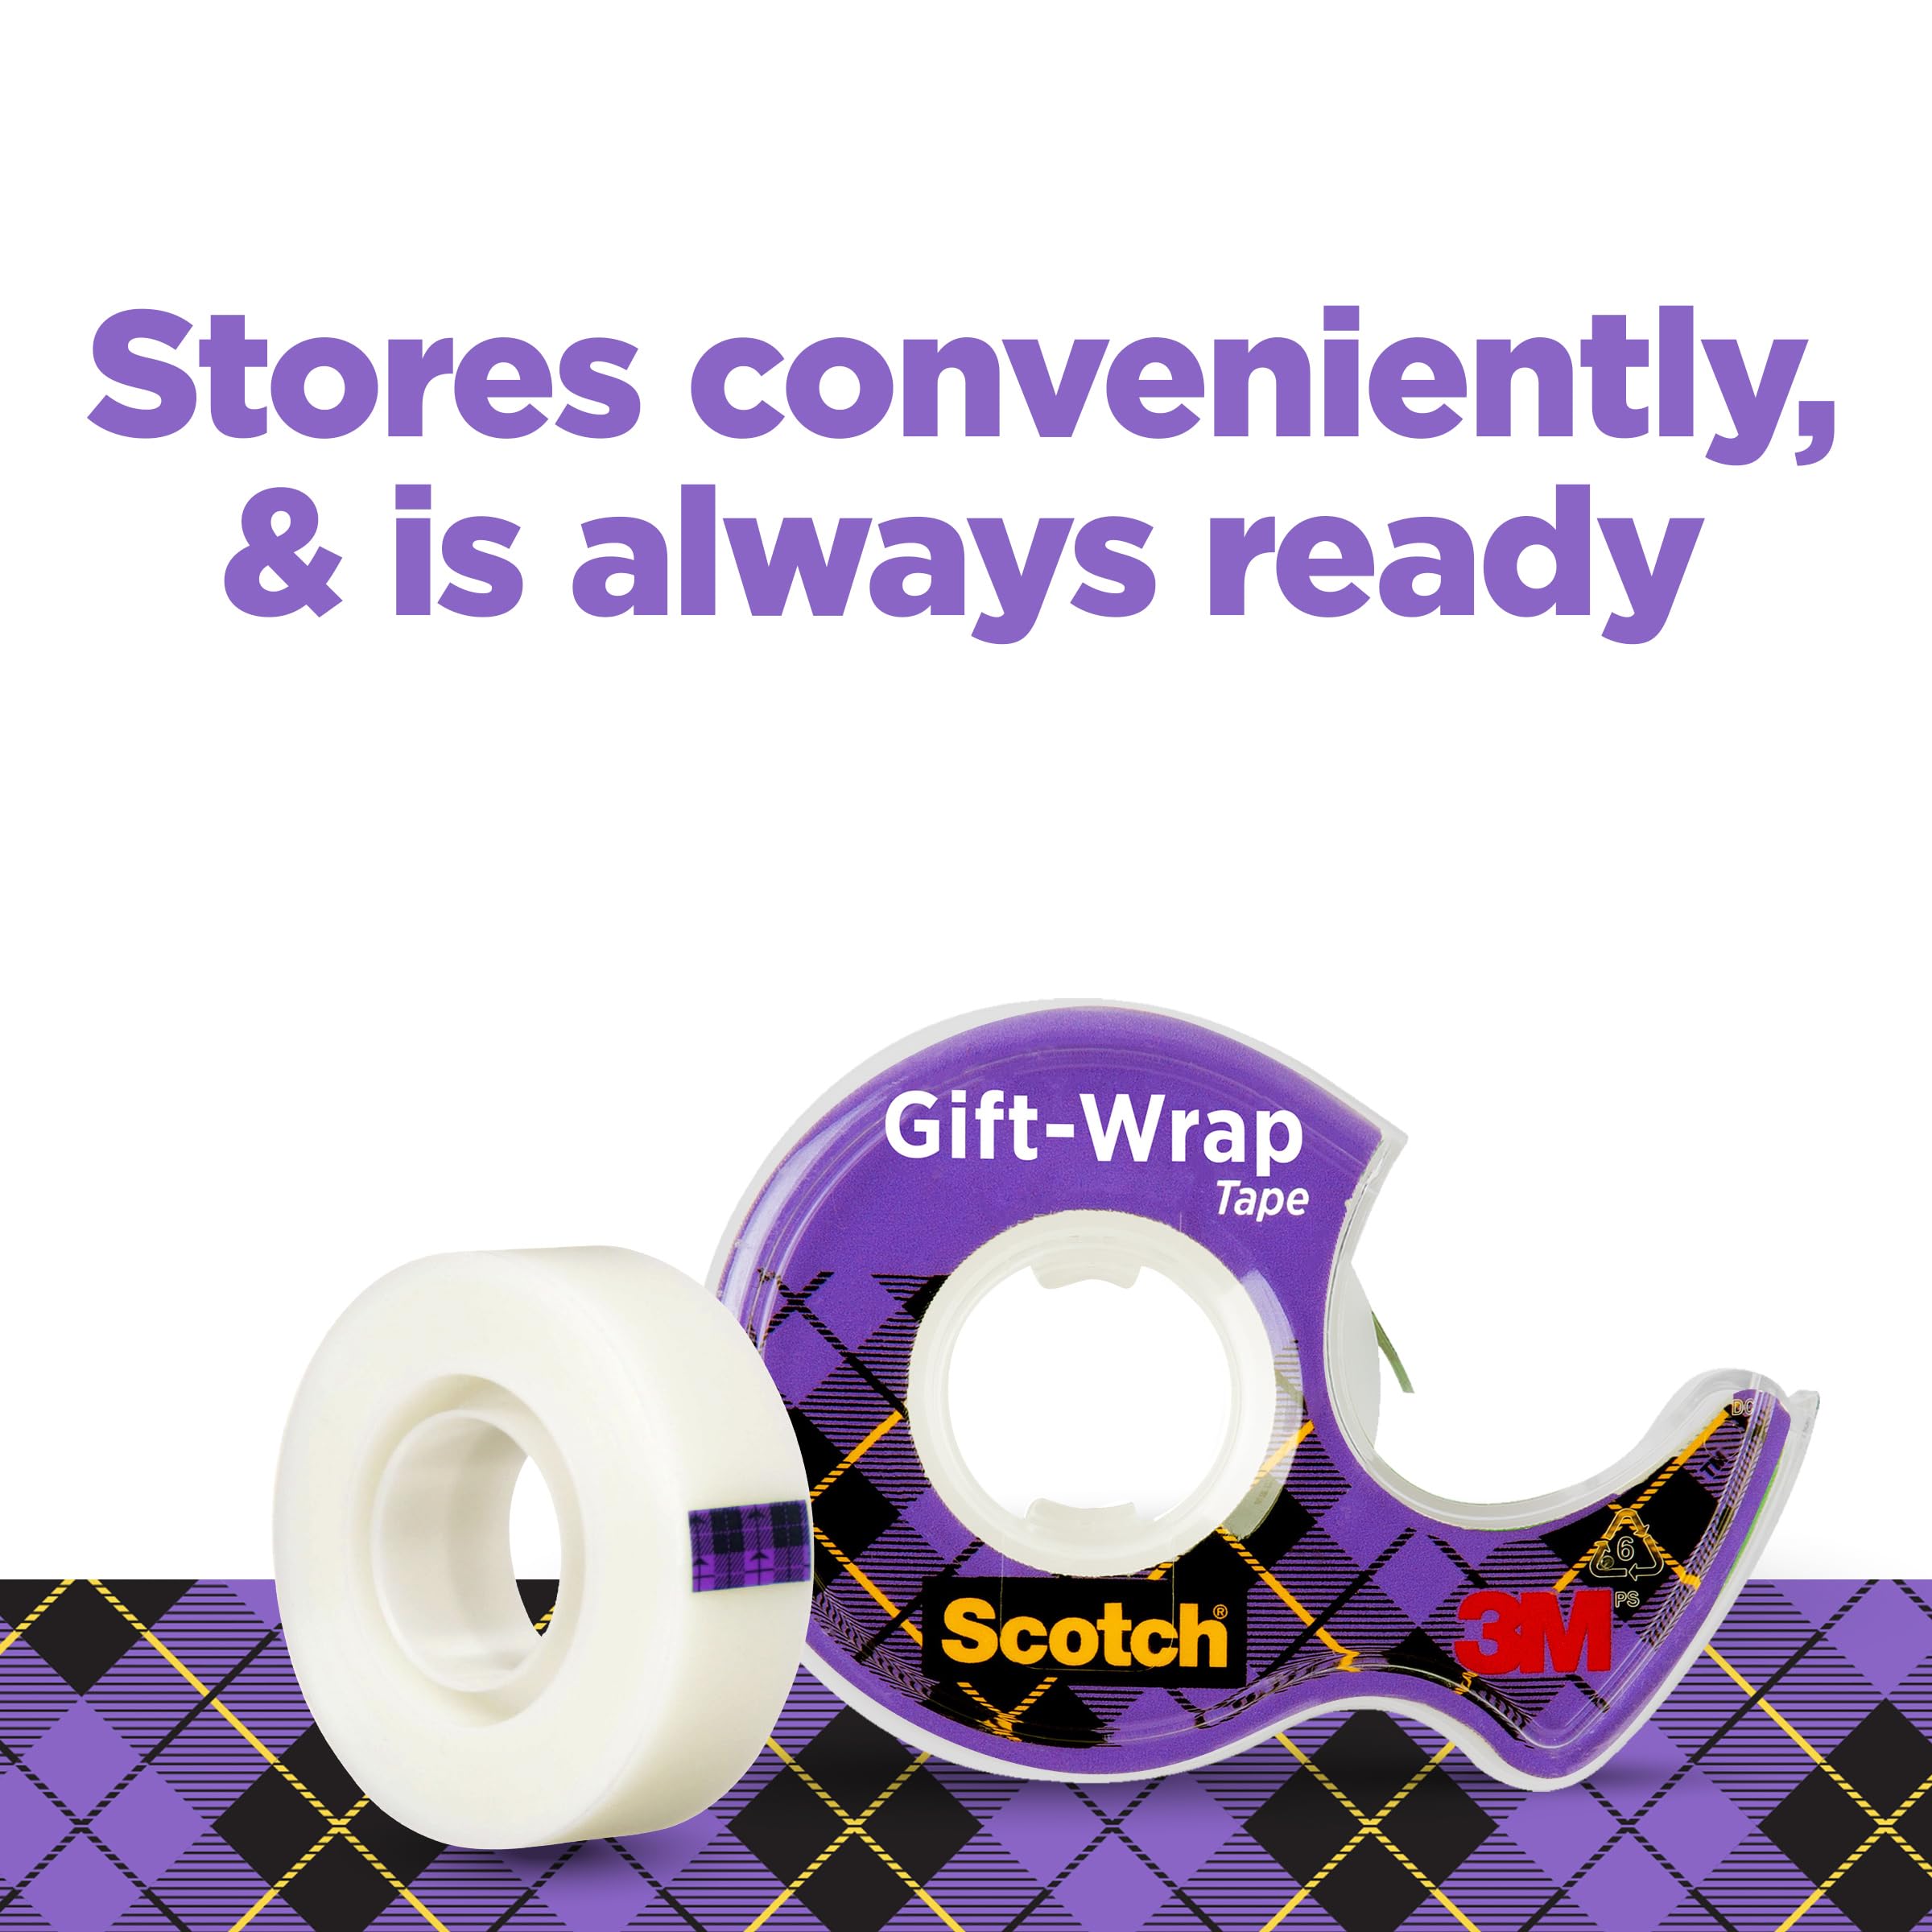 Scotch Gift Wrap Tape, Invisible, Holiday Gift Wrapping Supplies for Christmas Presents and Gift Bags, 0.75 in. x 600 in., 2 Tape Rolls With Dispensers